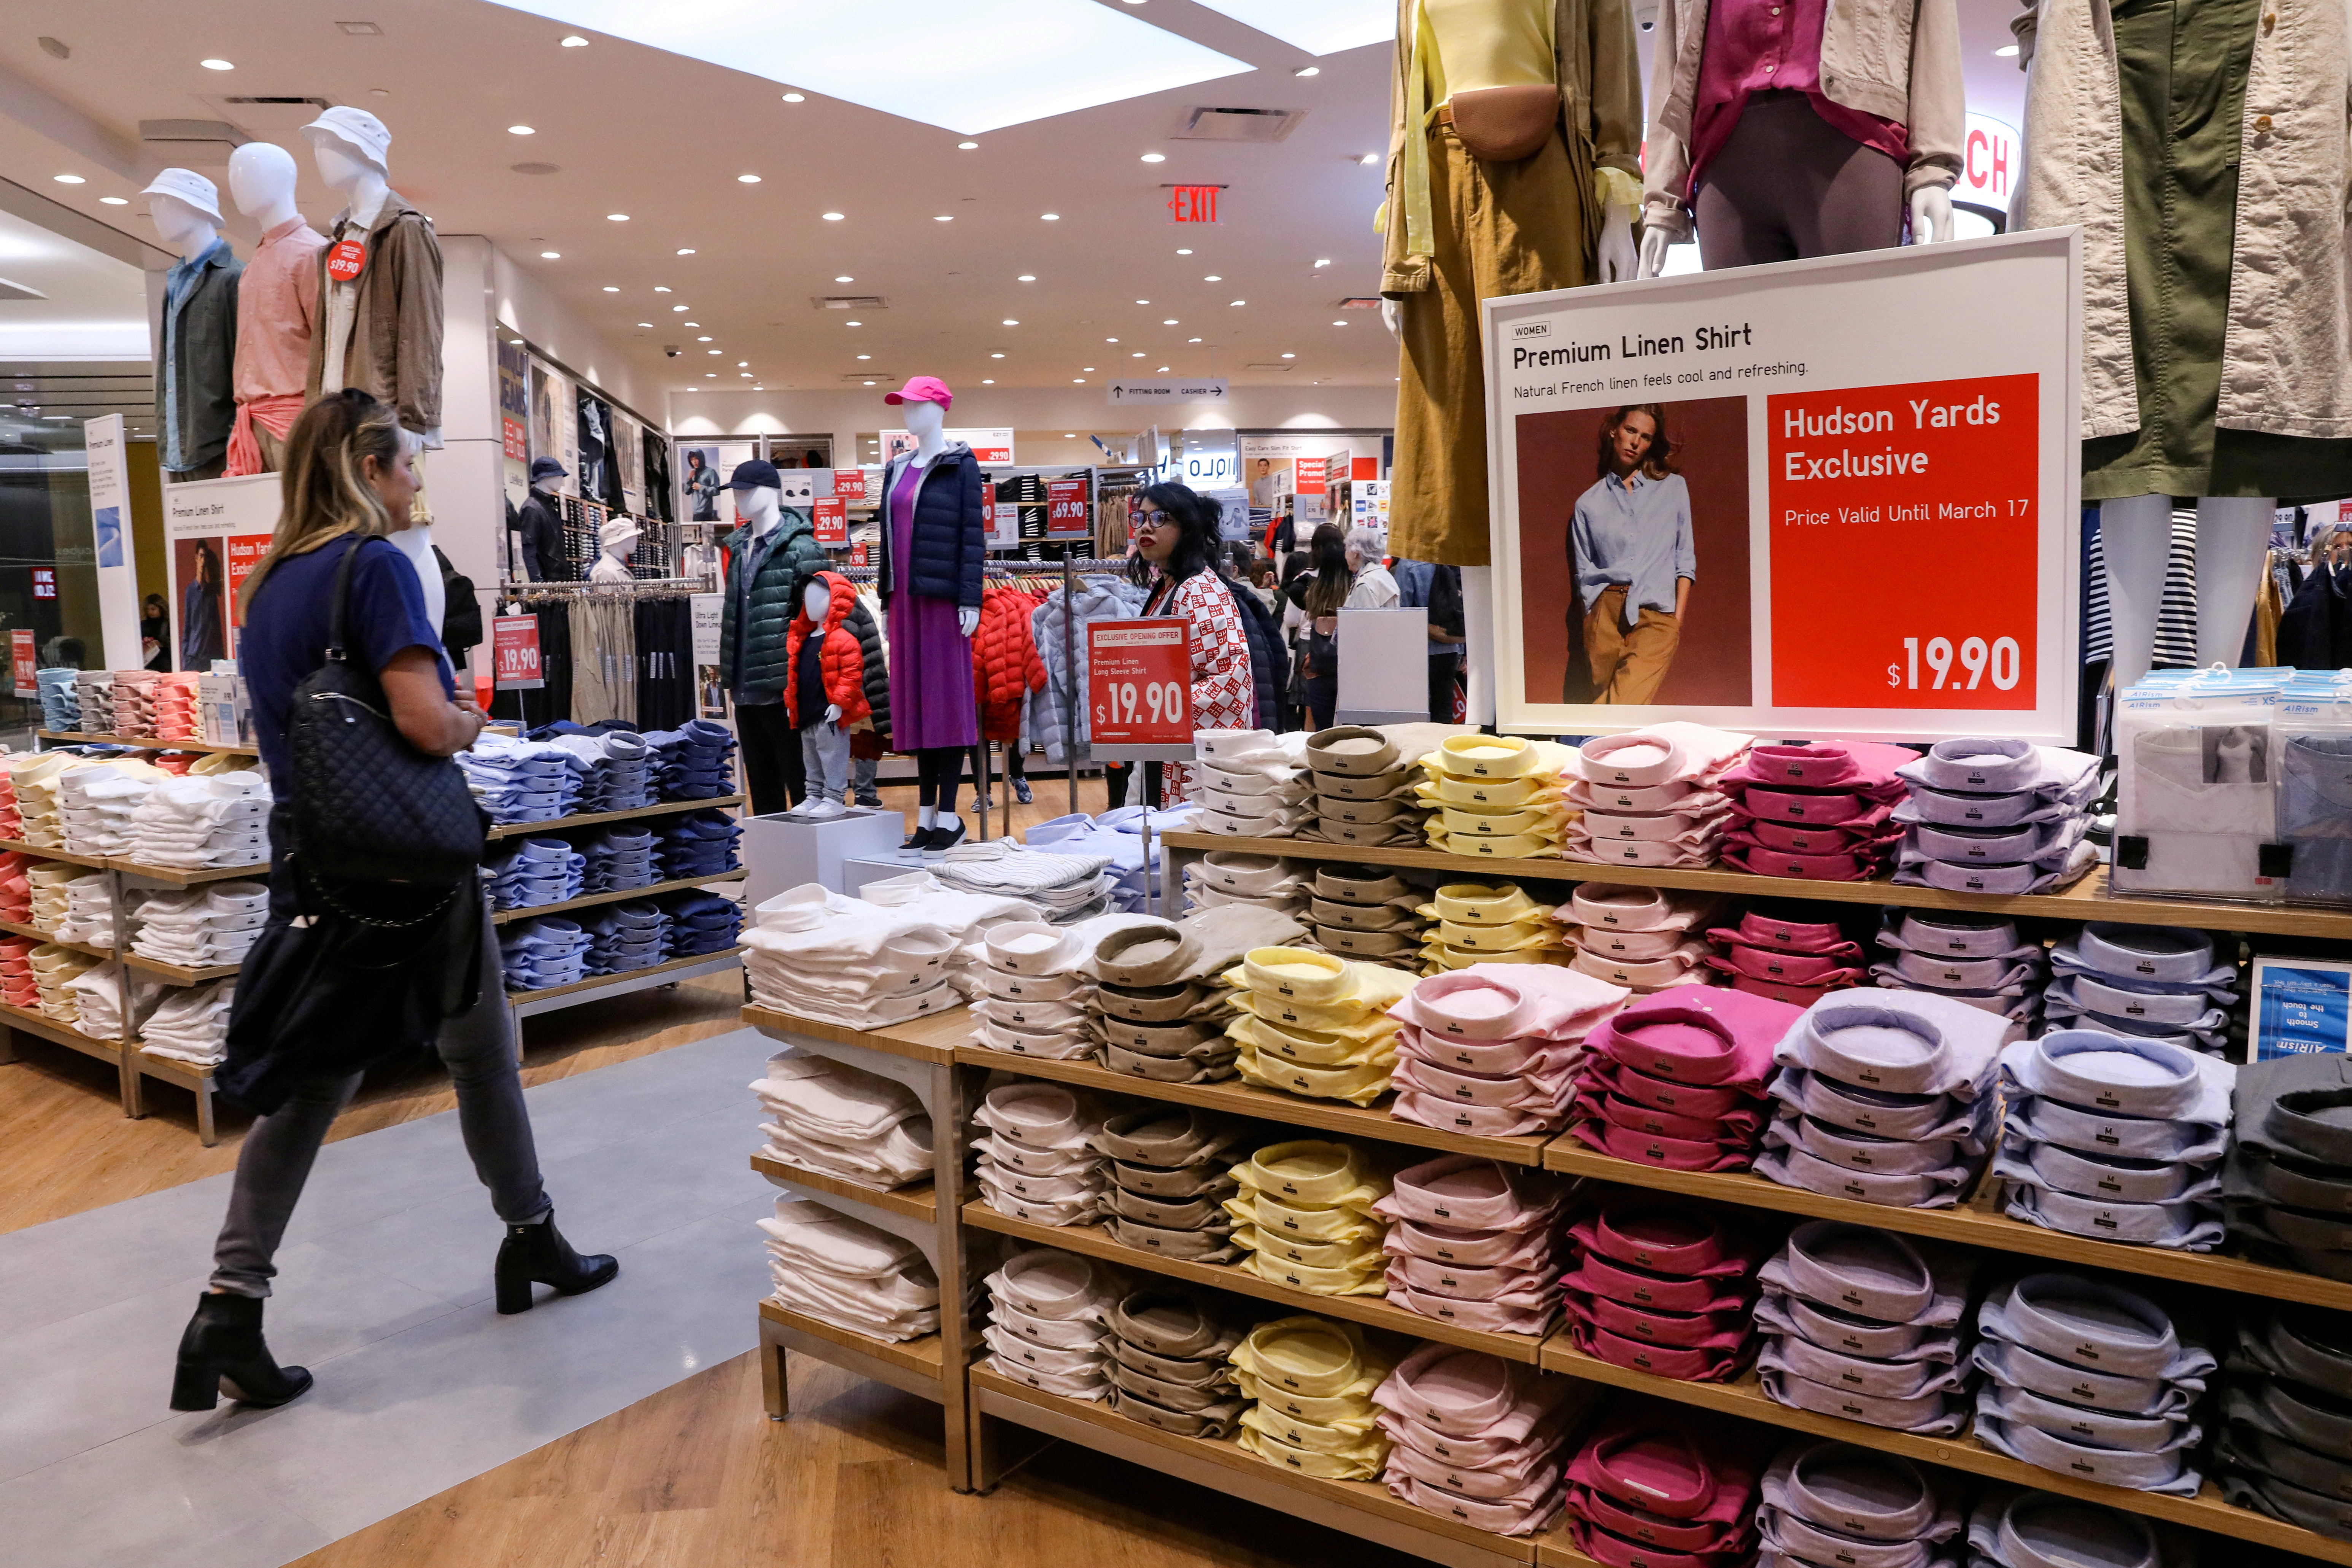 People shop at a UNIQLO store during the grand opening of the The Hudson Yards development in New York